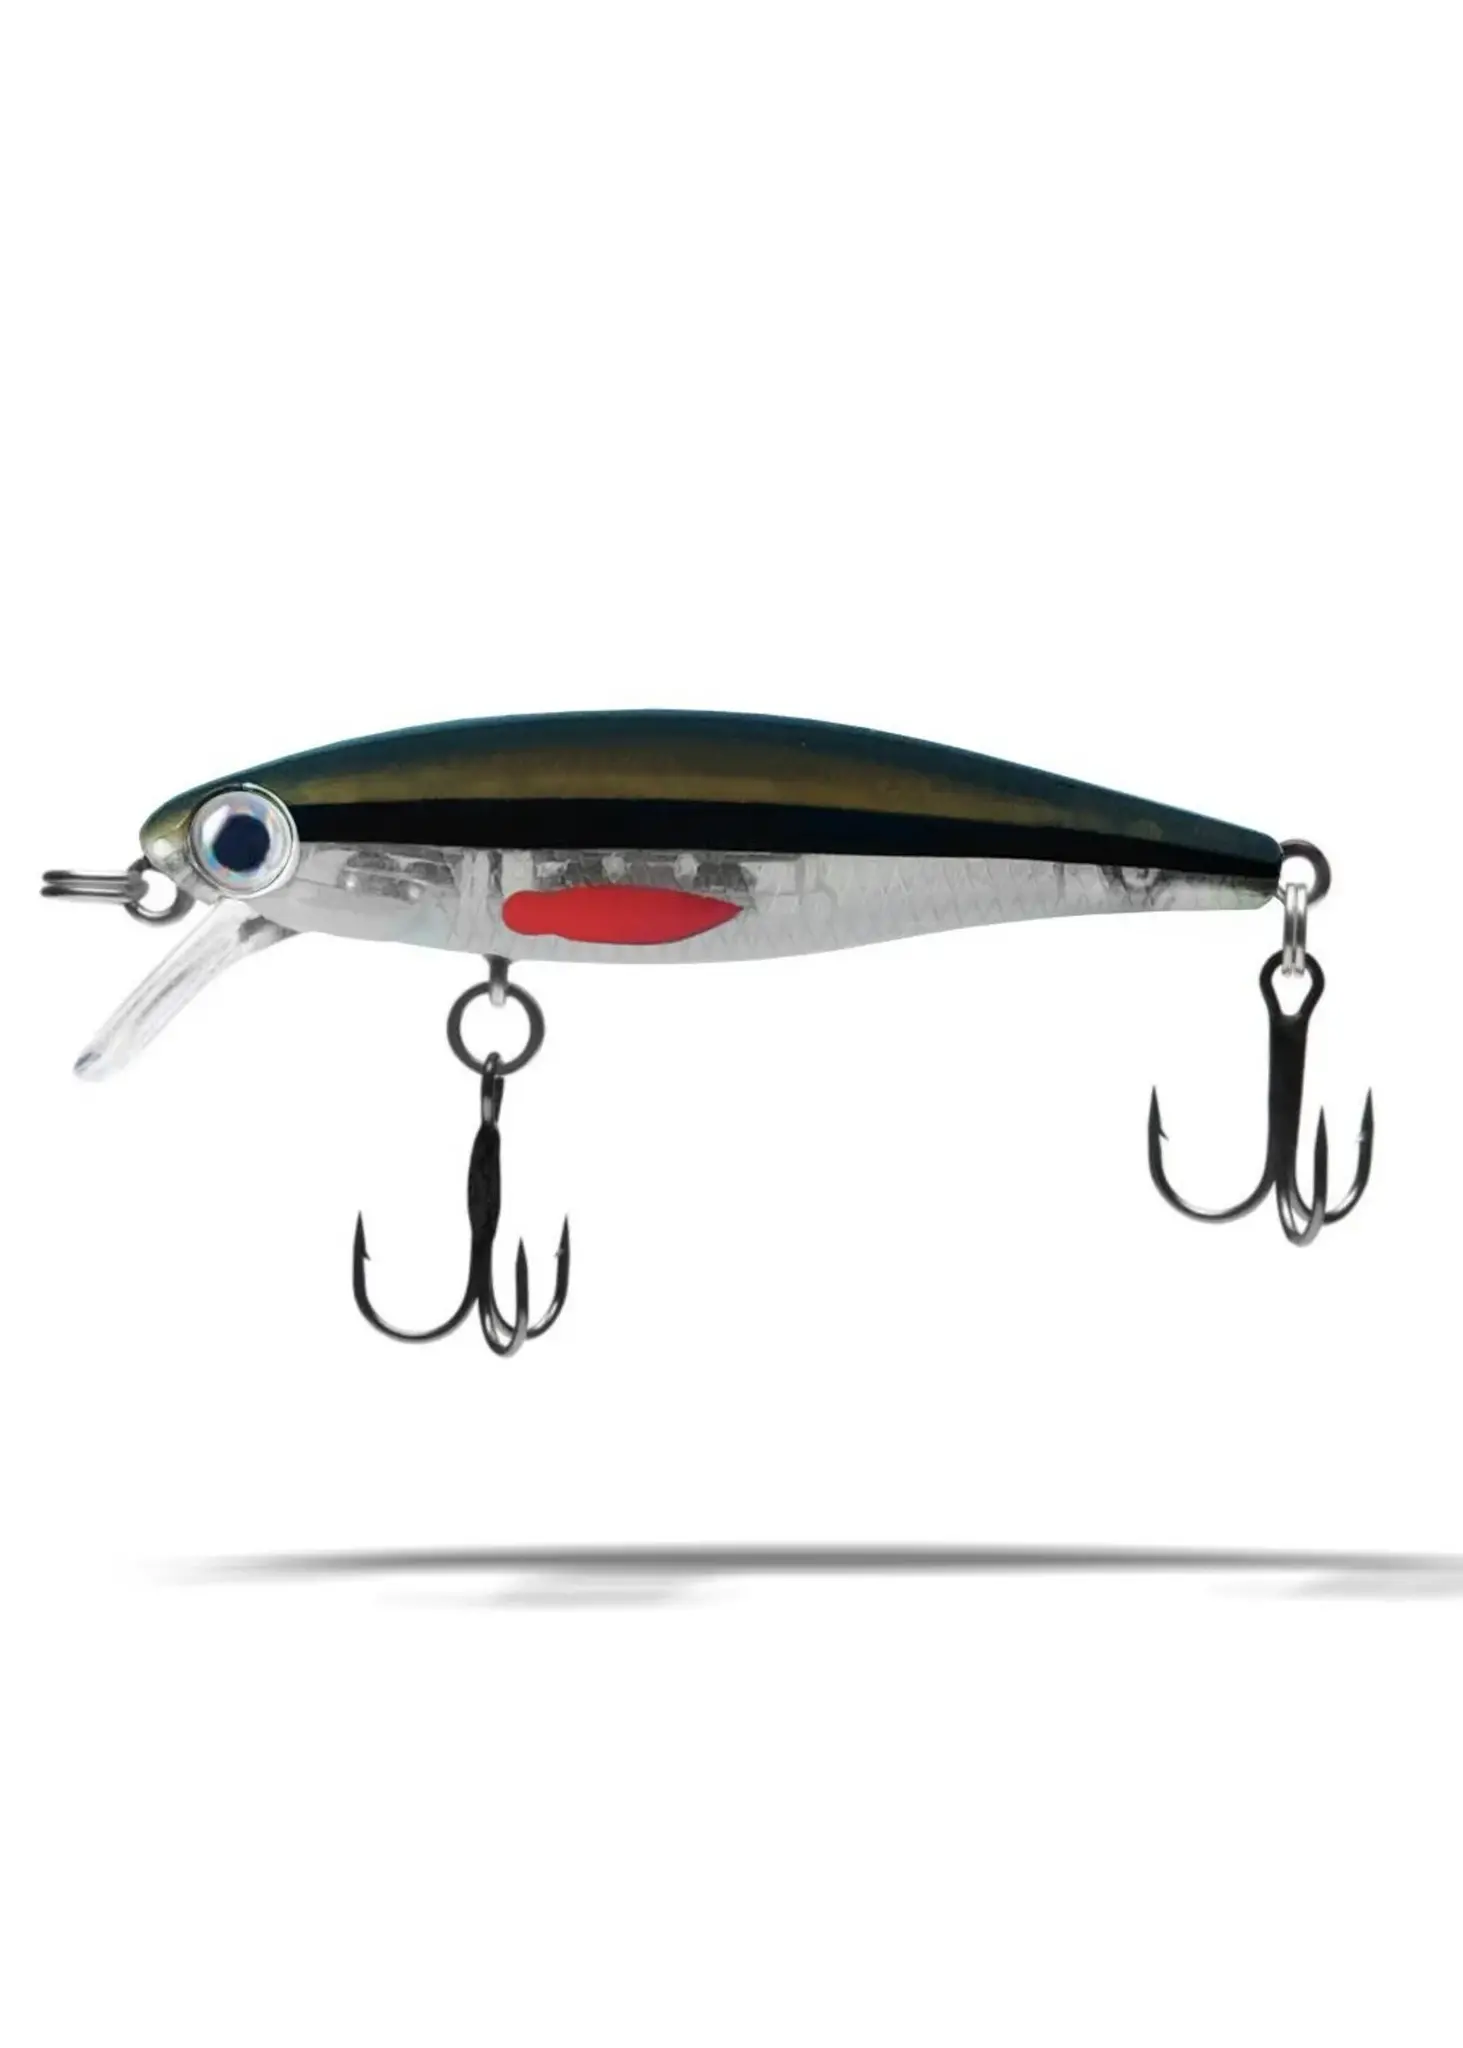 Thomas EP Spin Lures, Trout Lures